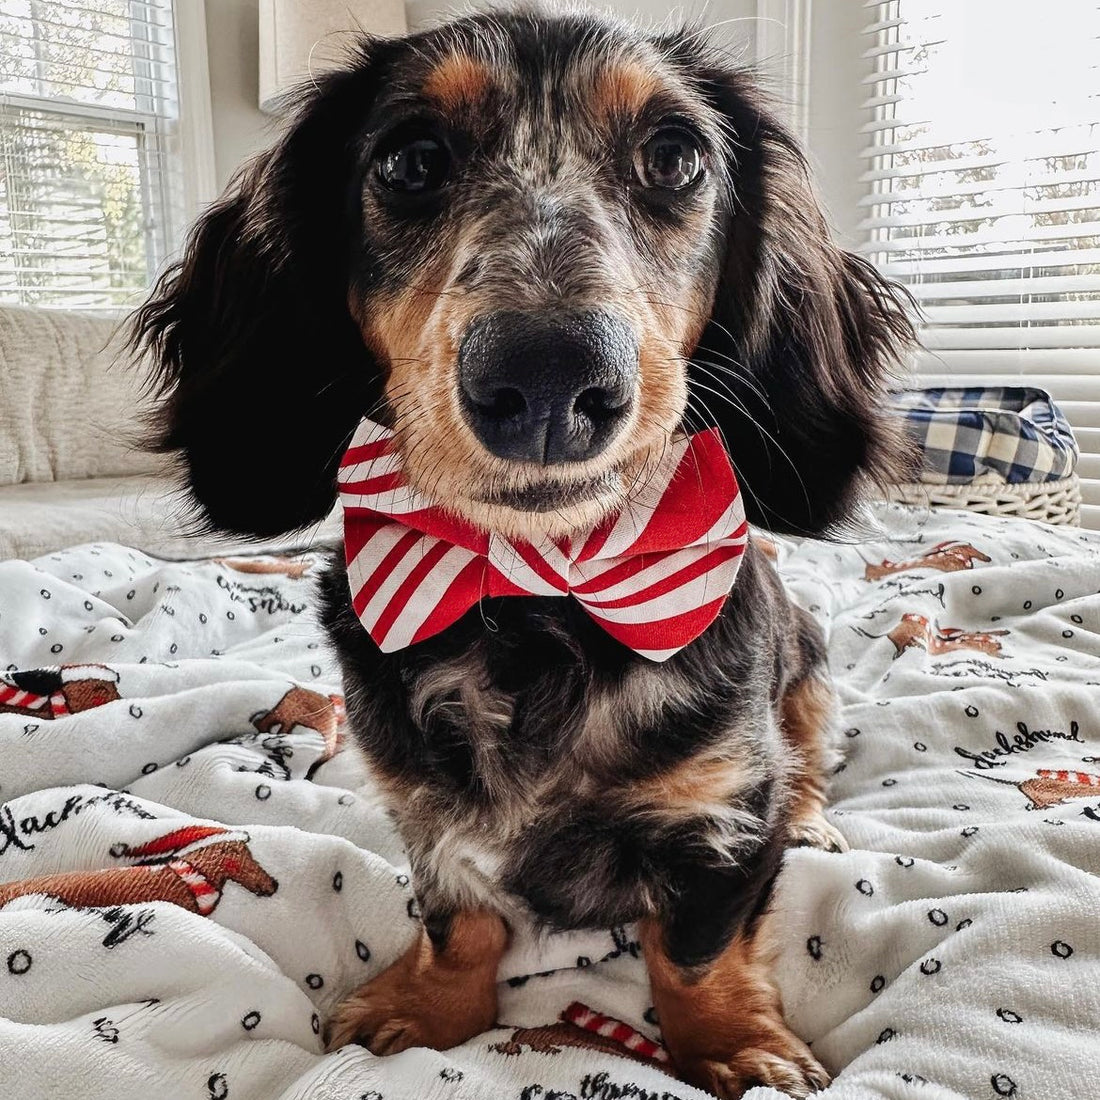 Candy Cane Bow Tie